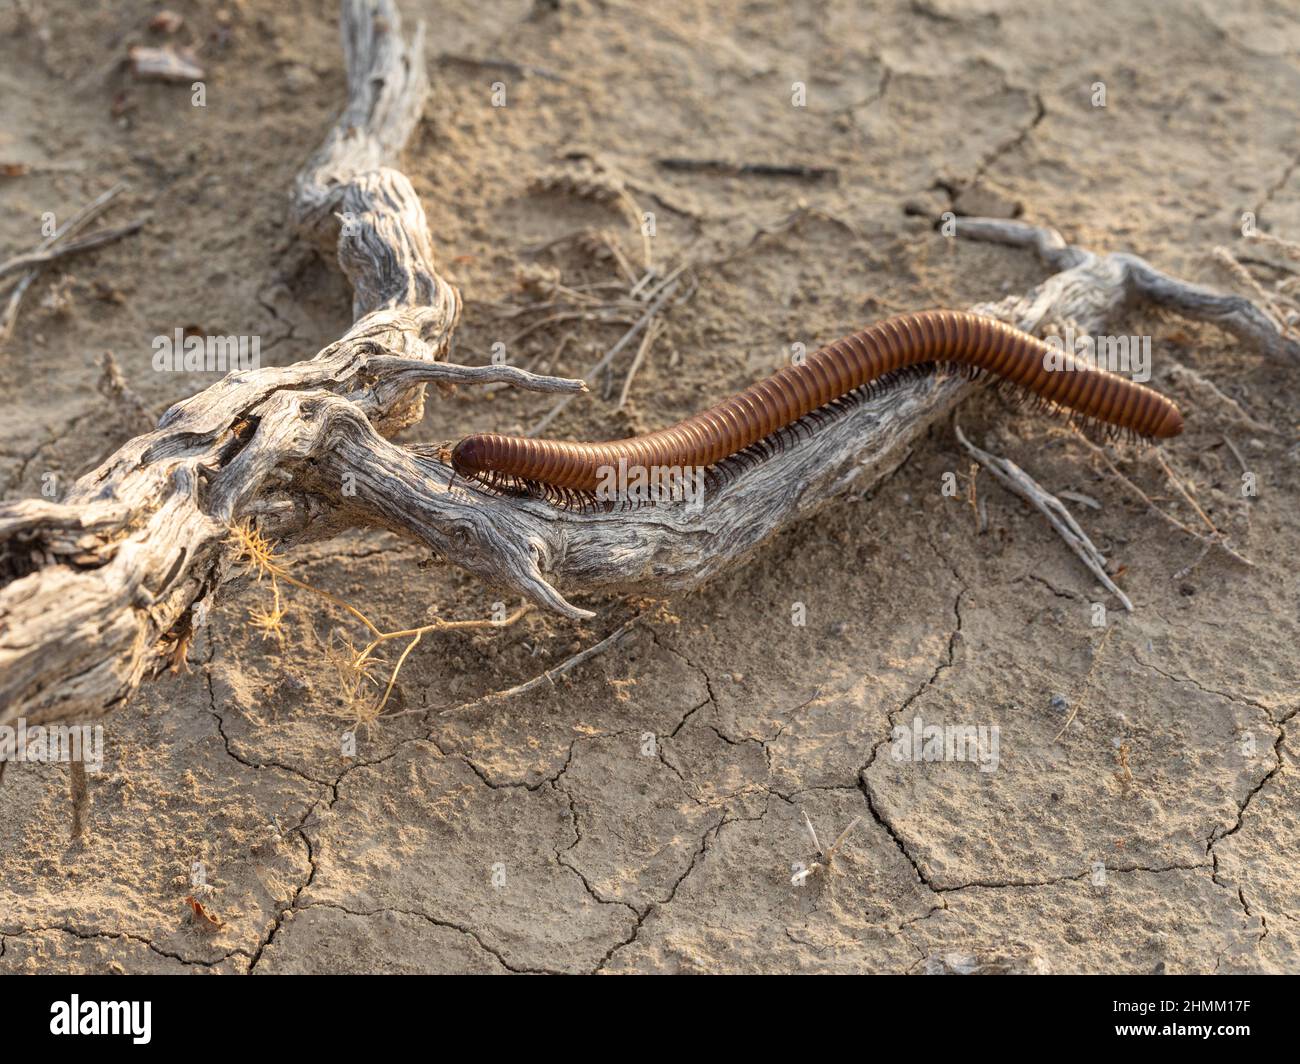 Desert millipedes emerge during the summer monsoons. To escape the heat of the desert floor they climb into shrubs. Stock Photo